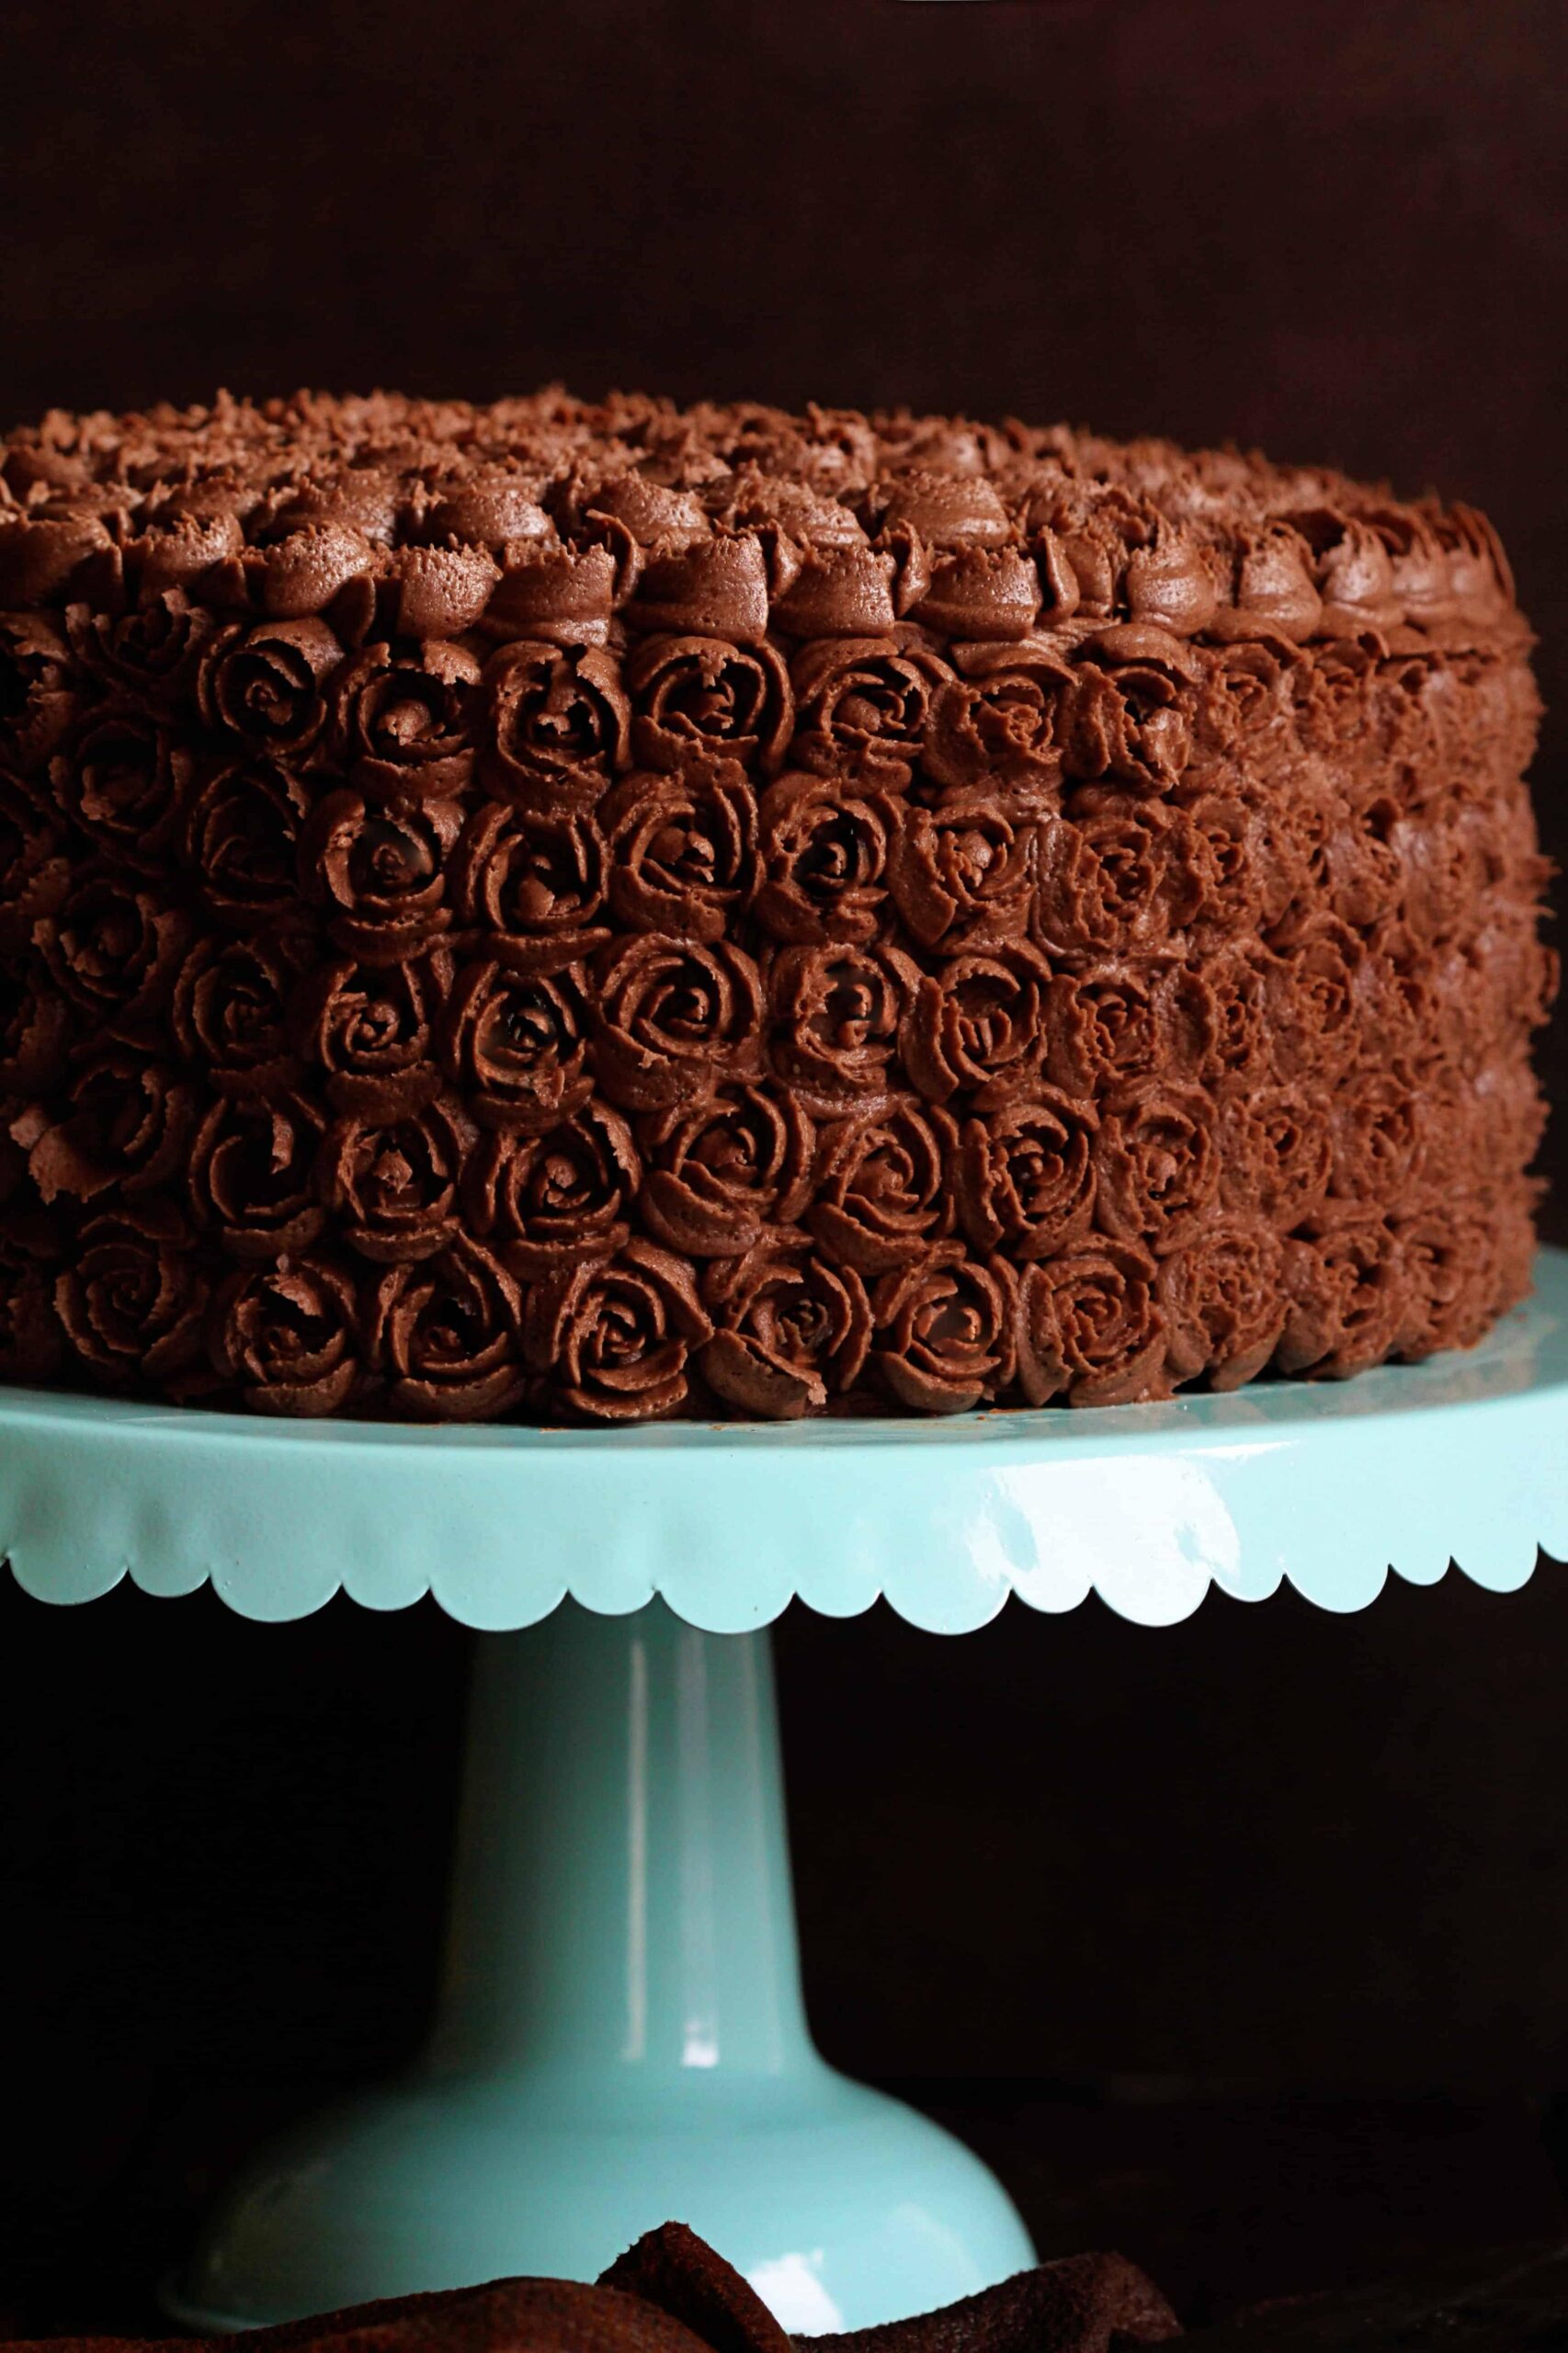  Dessert comes first with this rich and velvety chocolate-coffee frosting